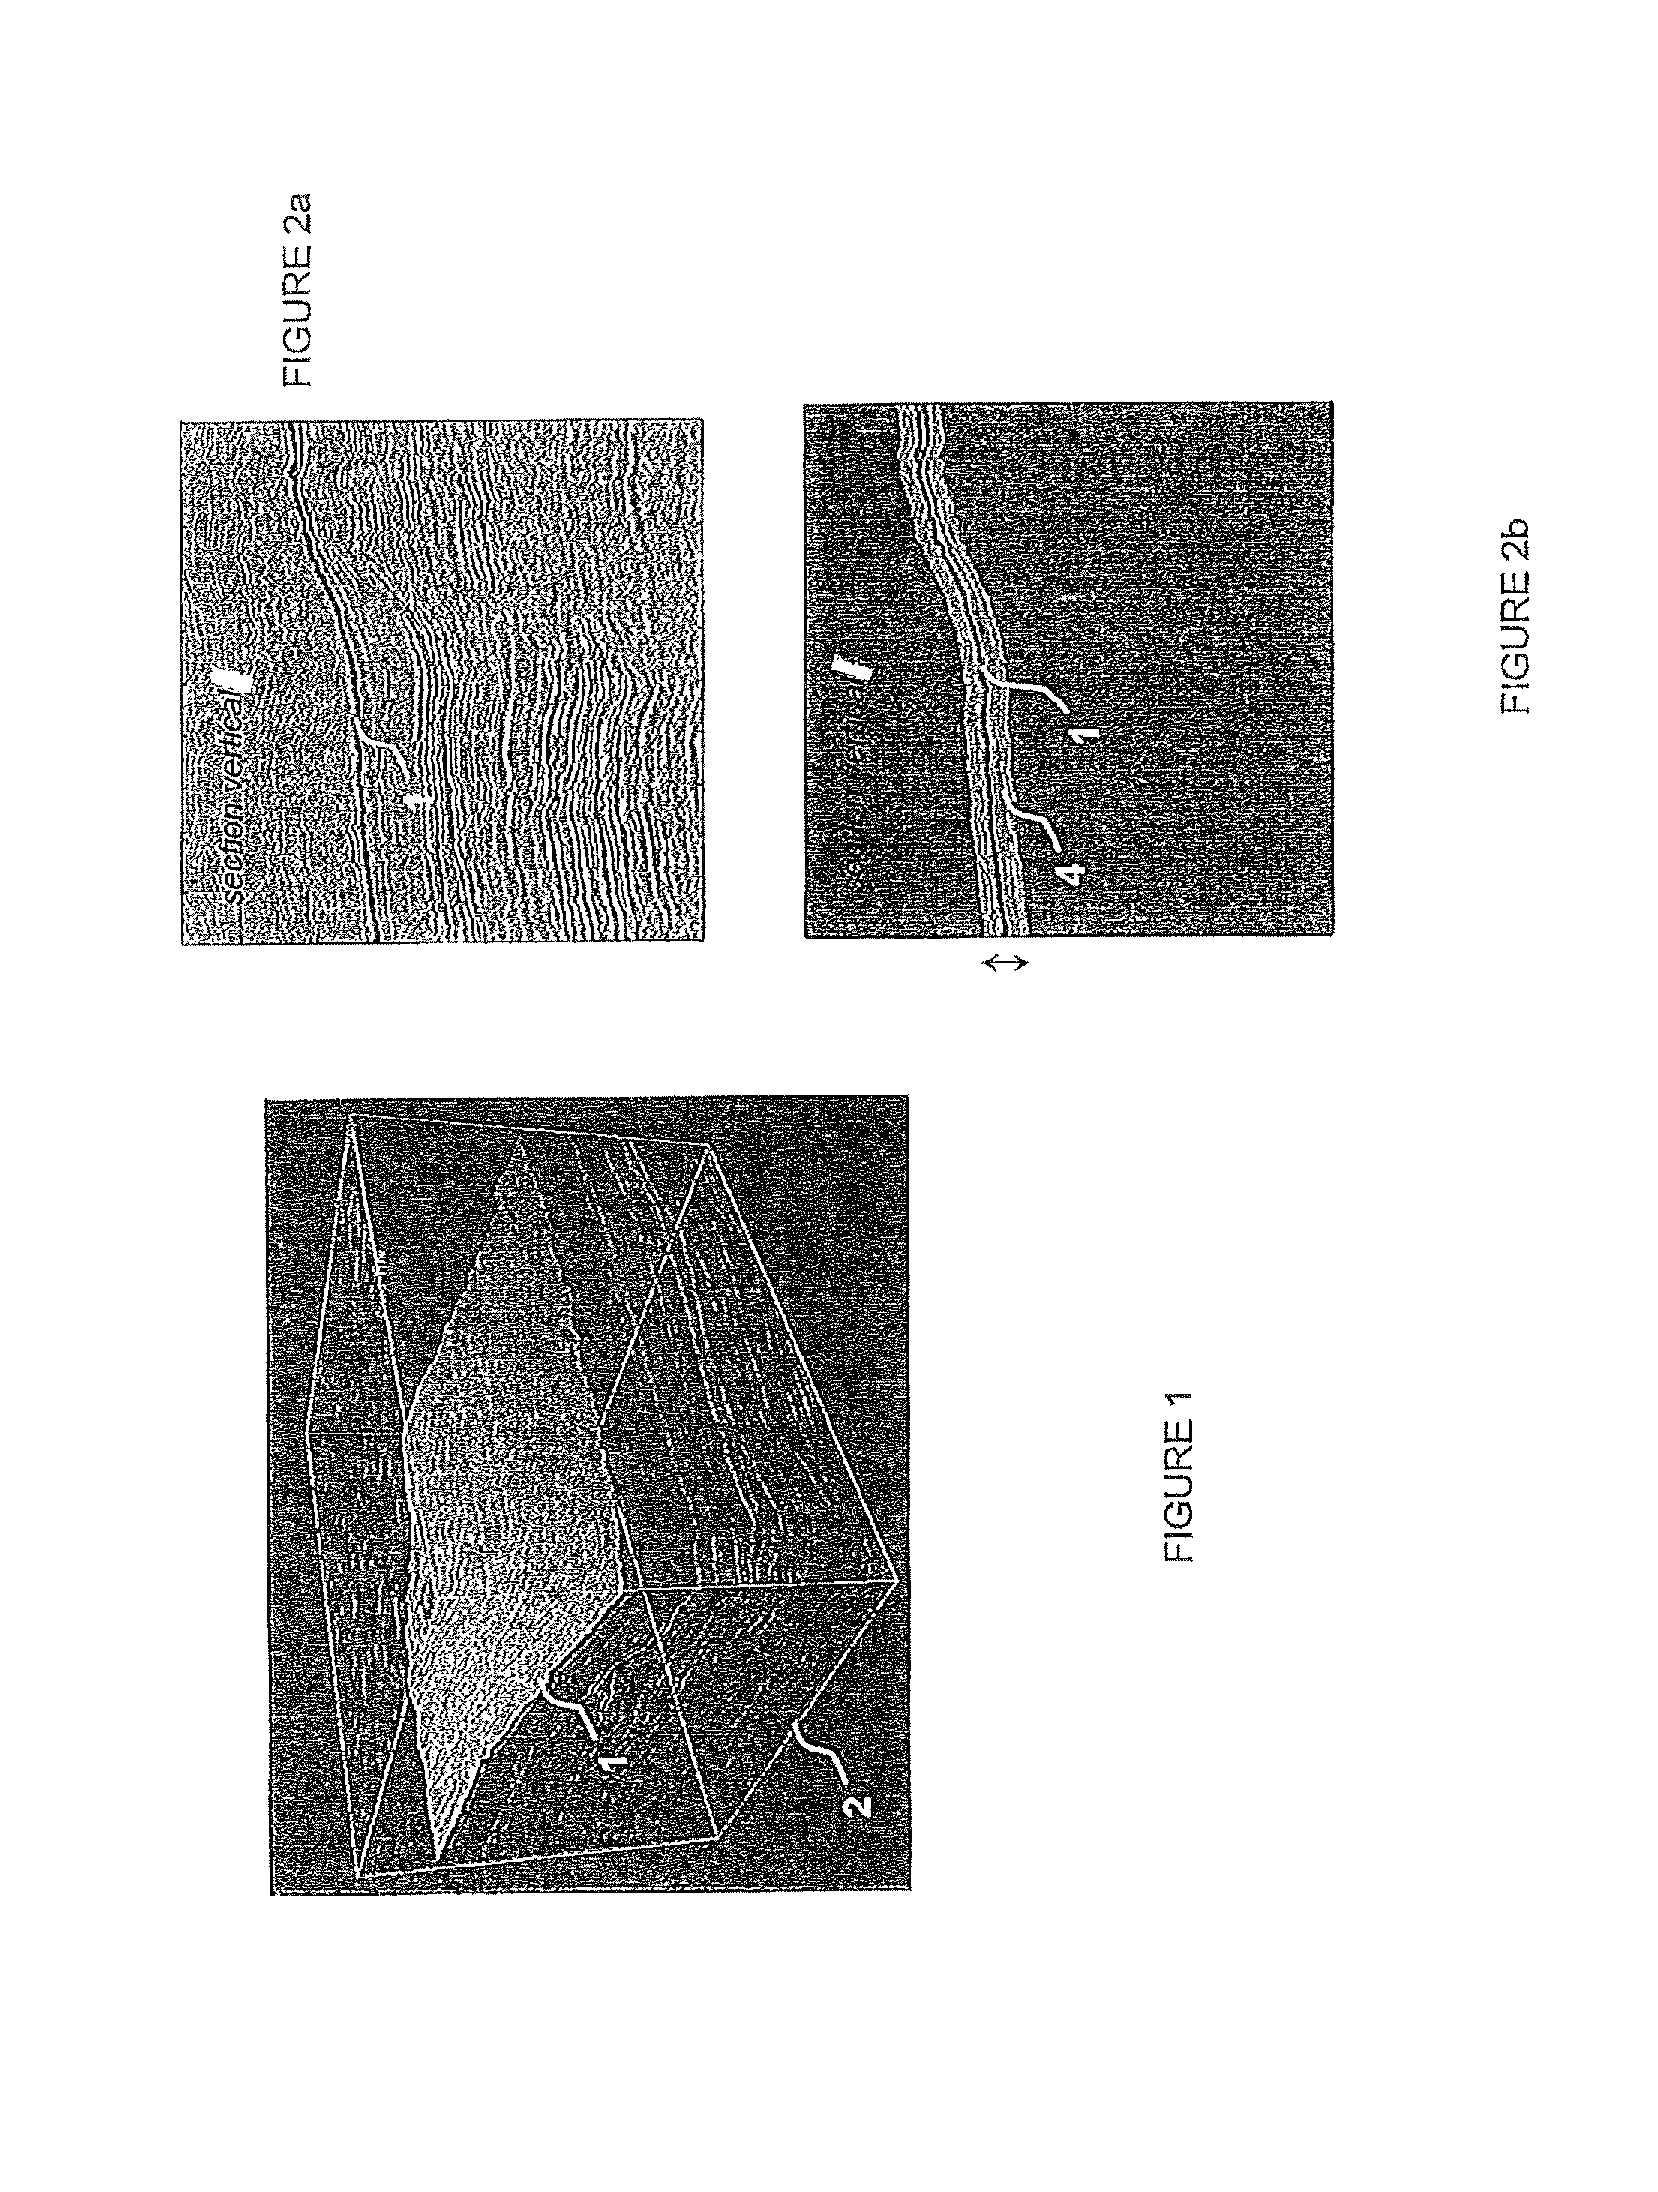 Method for hierarchical determination of coherent events in a seismic image